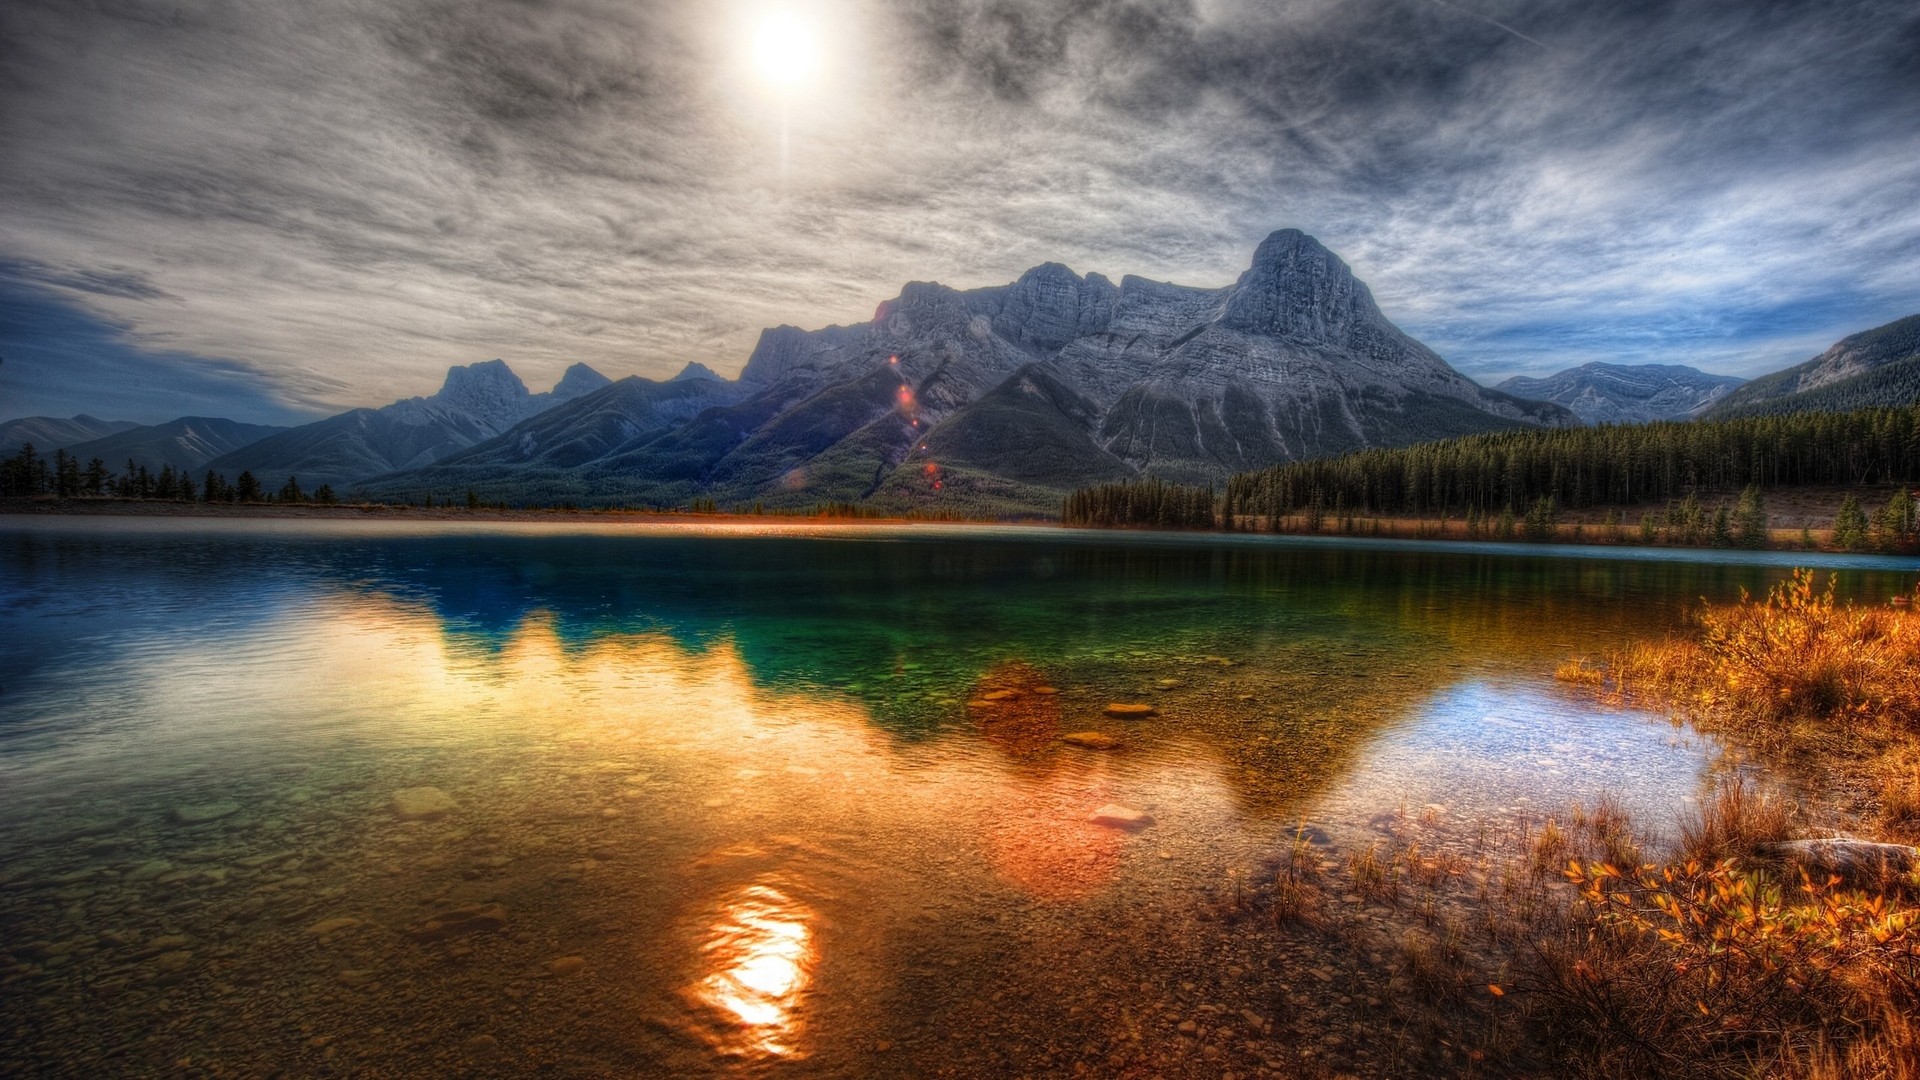 General 1920x1080 nature HDR sunset lake landscape mountains reflection Canada